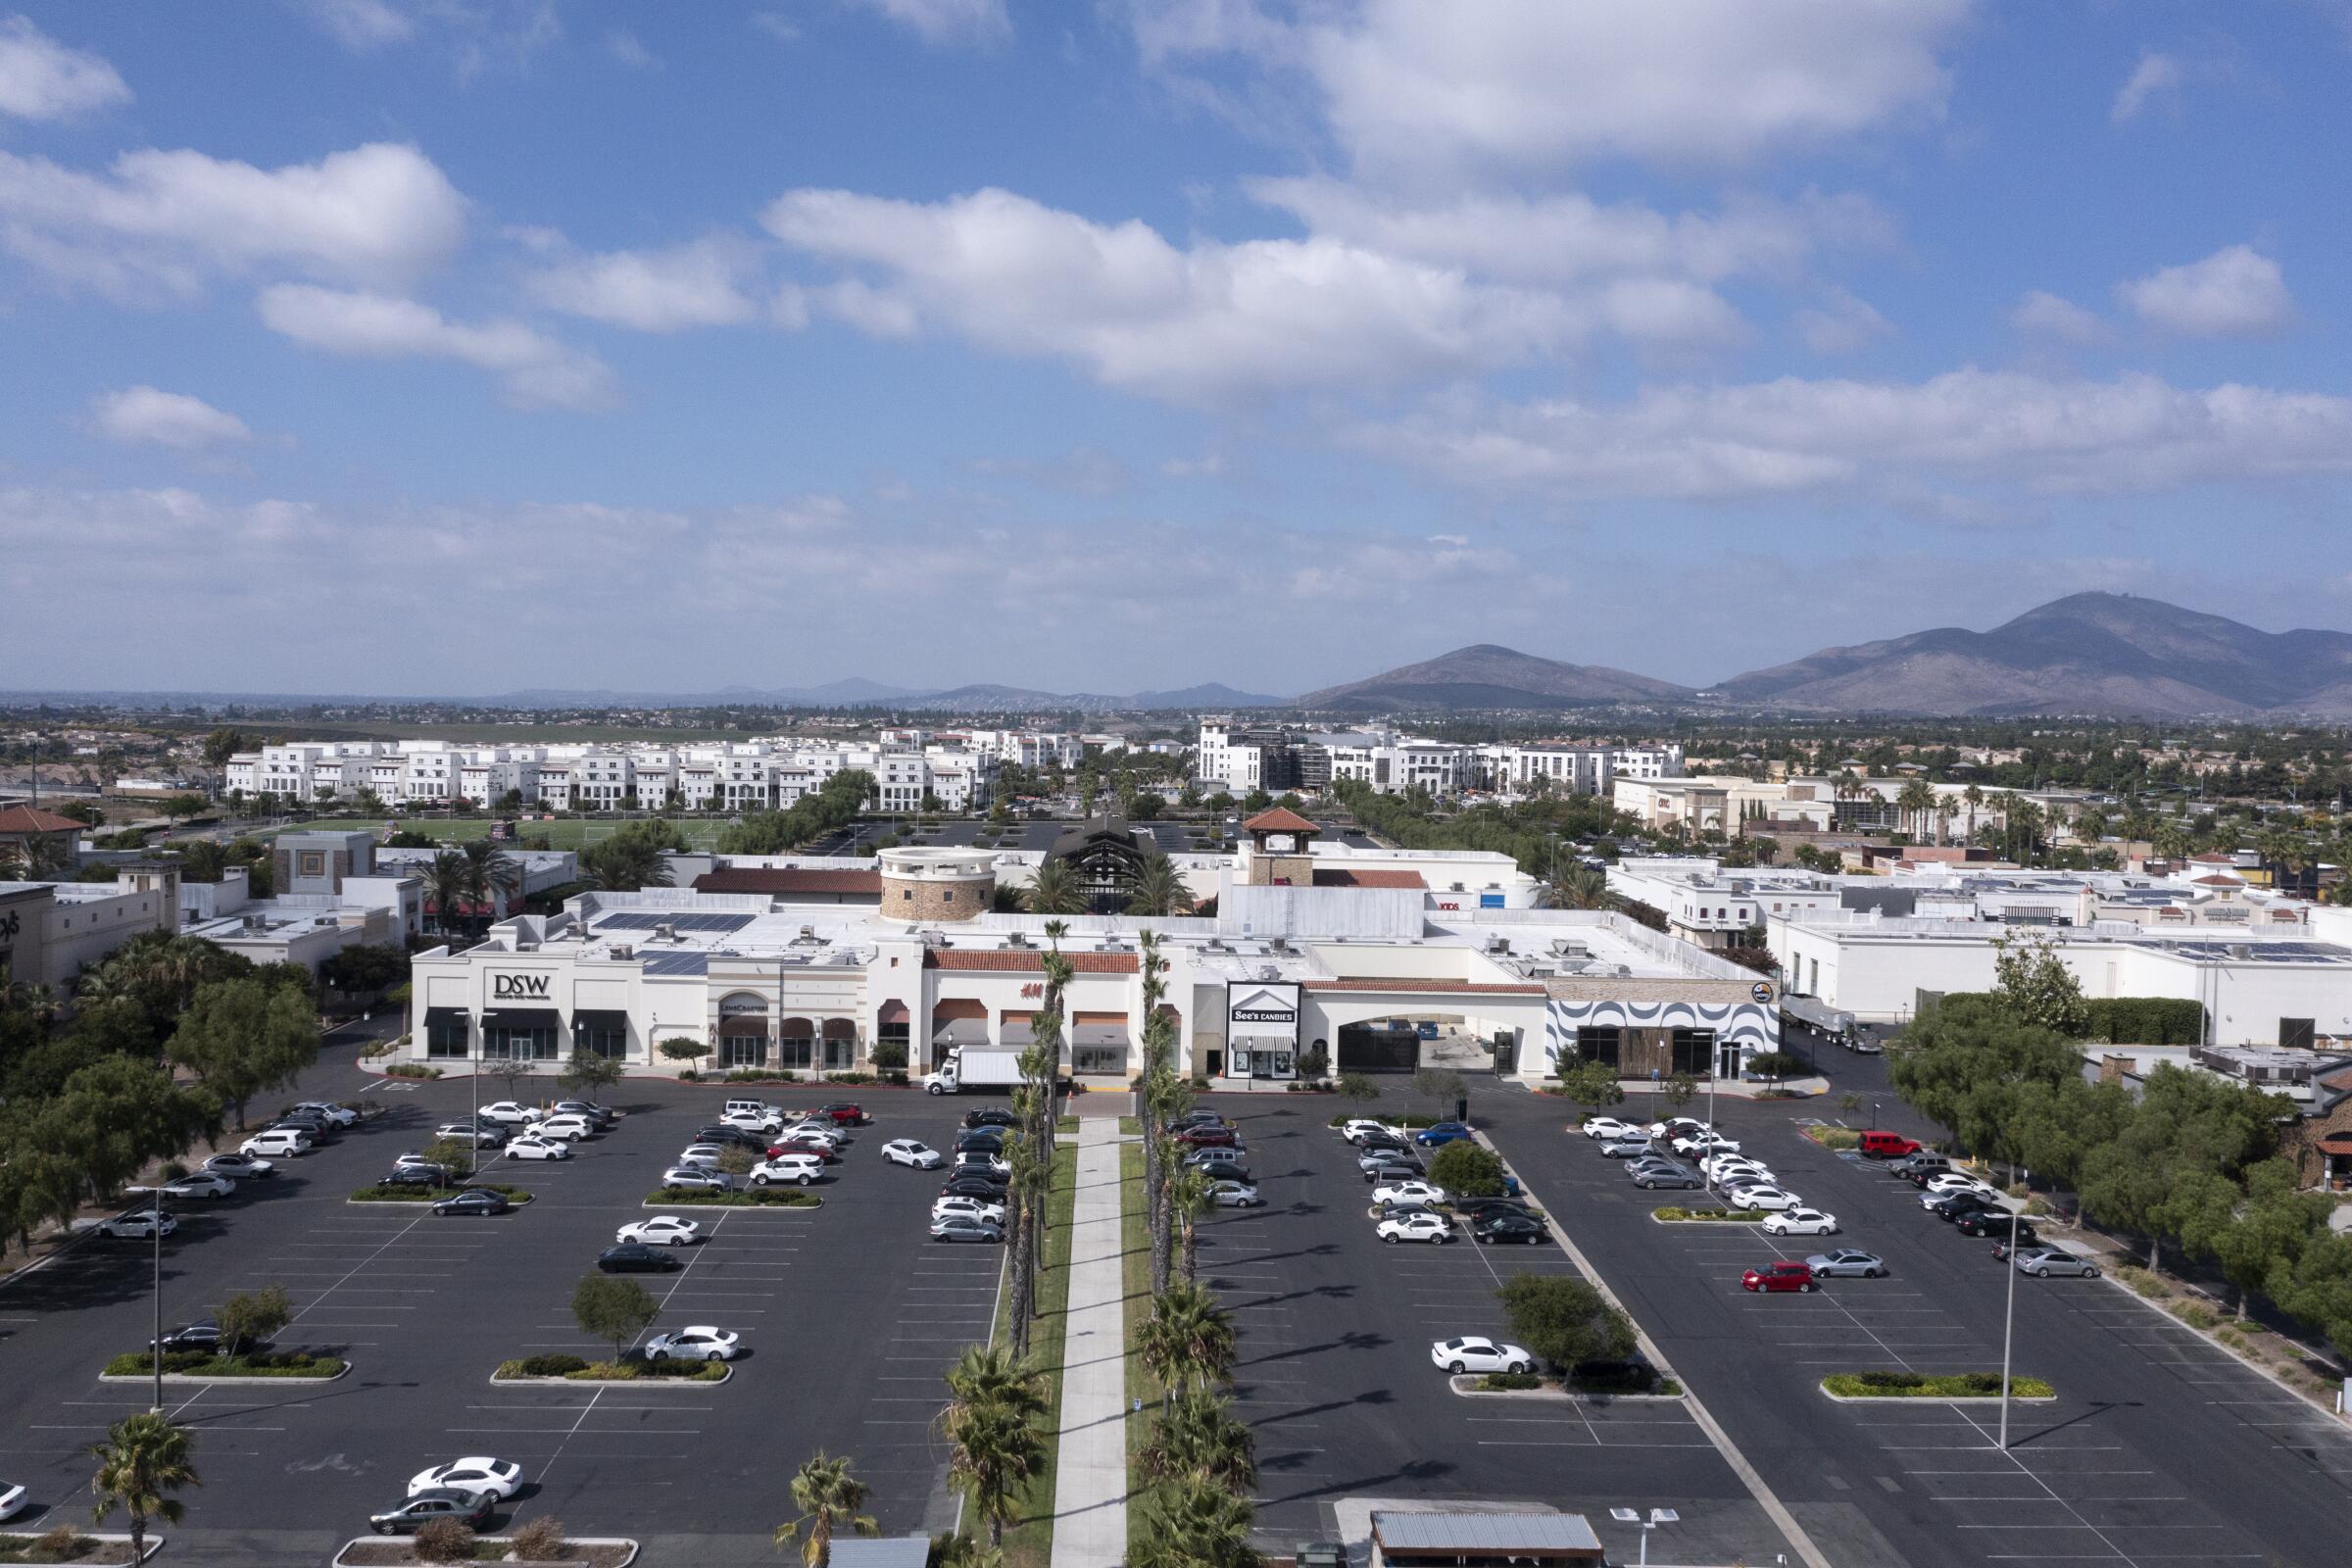 Westfield Mission Valley shopping centers sold for $290 million